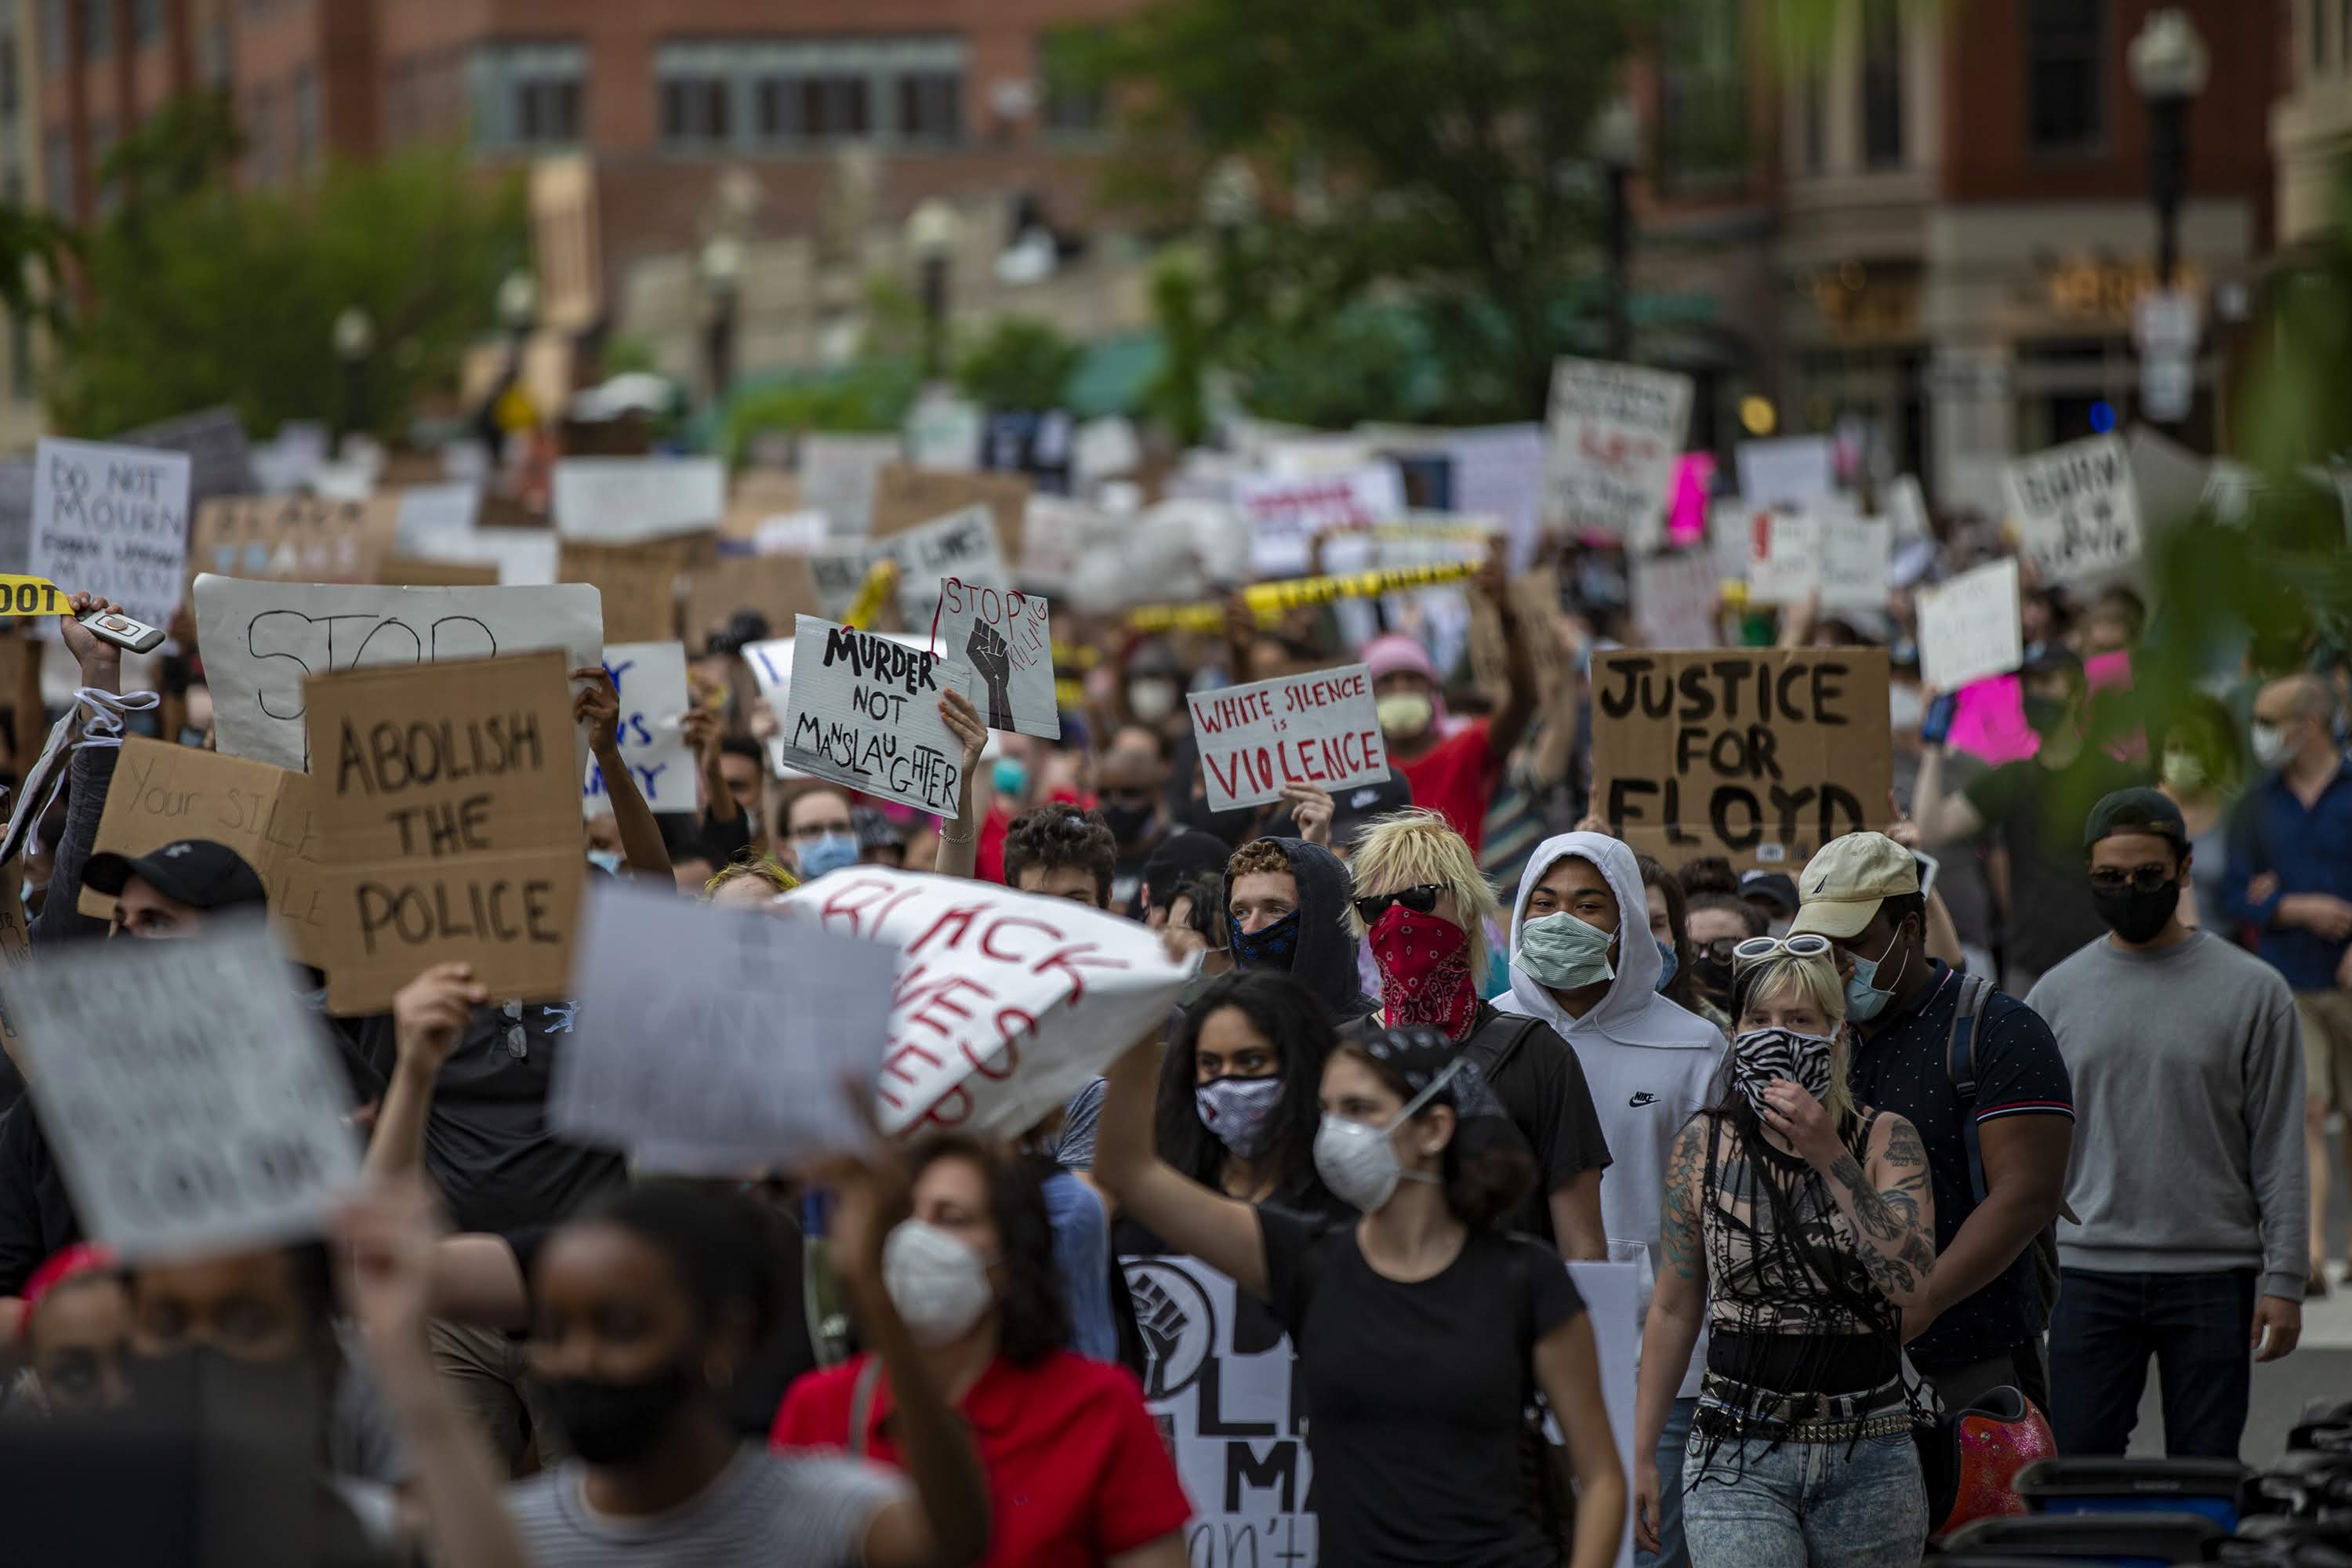 About a thousand protesters march down Washington Street in Boston in outrage over the killing of George Floyd, joining other protests nationwide. (Jesse Costa/WBUR